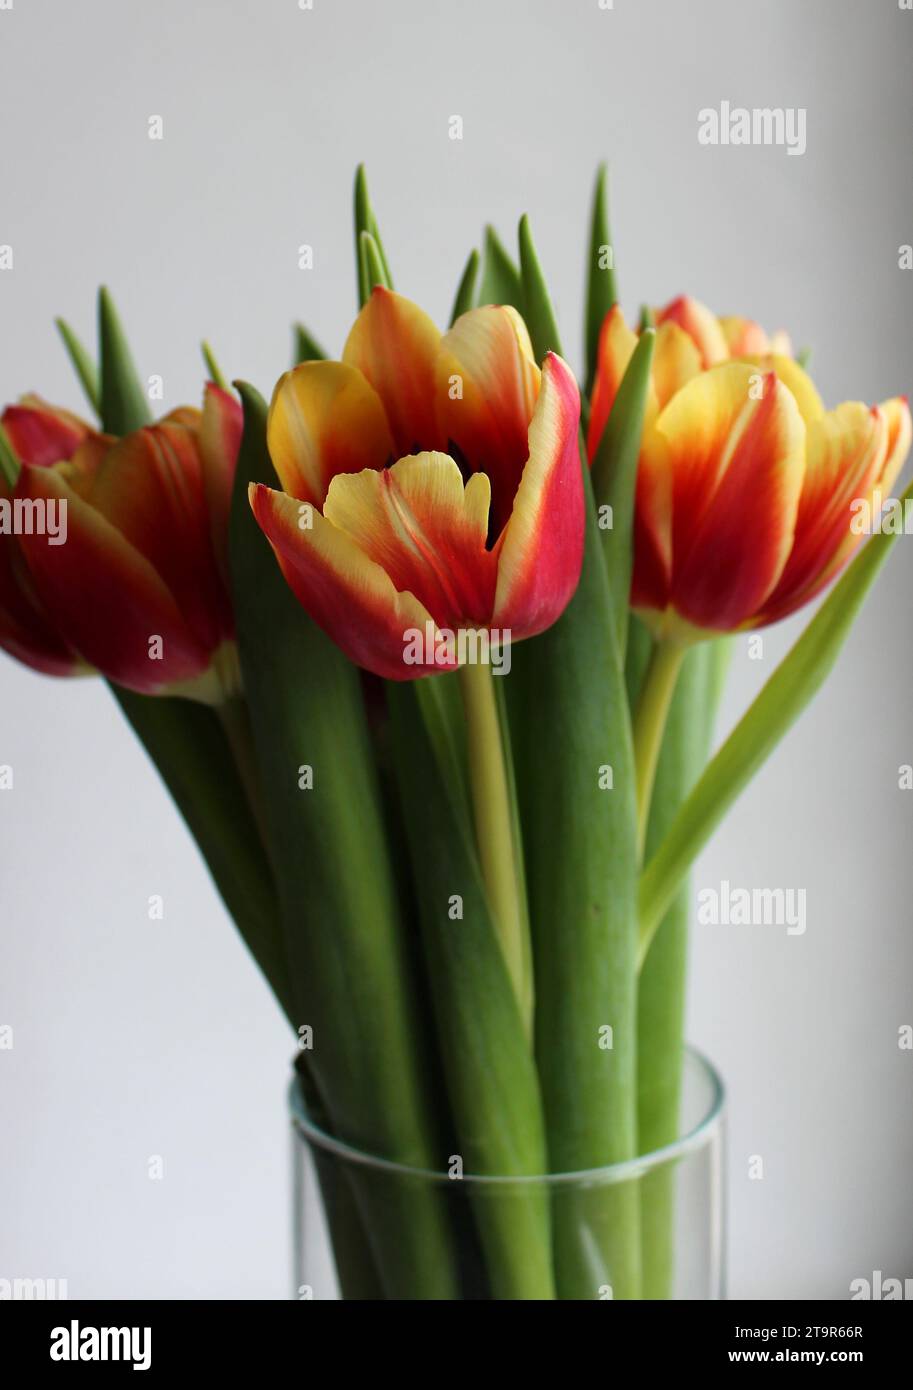 Top of a bouquet of red tulips with yellow edges in a glass vase isolated on white background Stock Photo